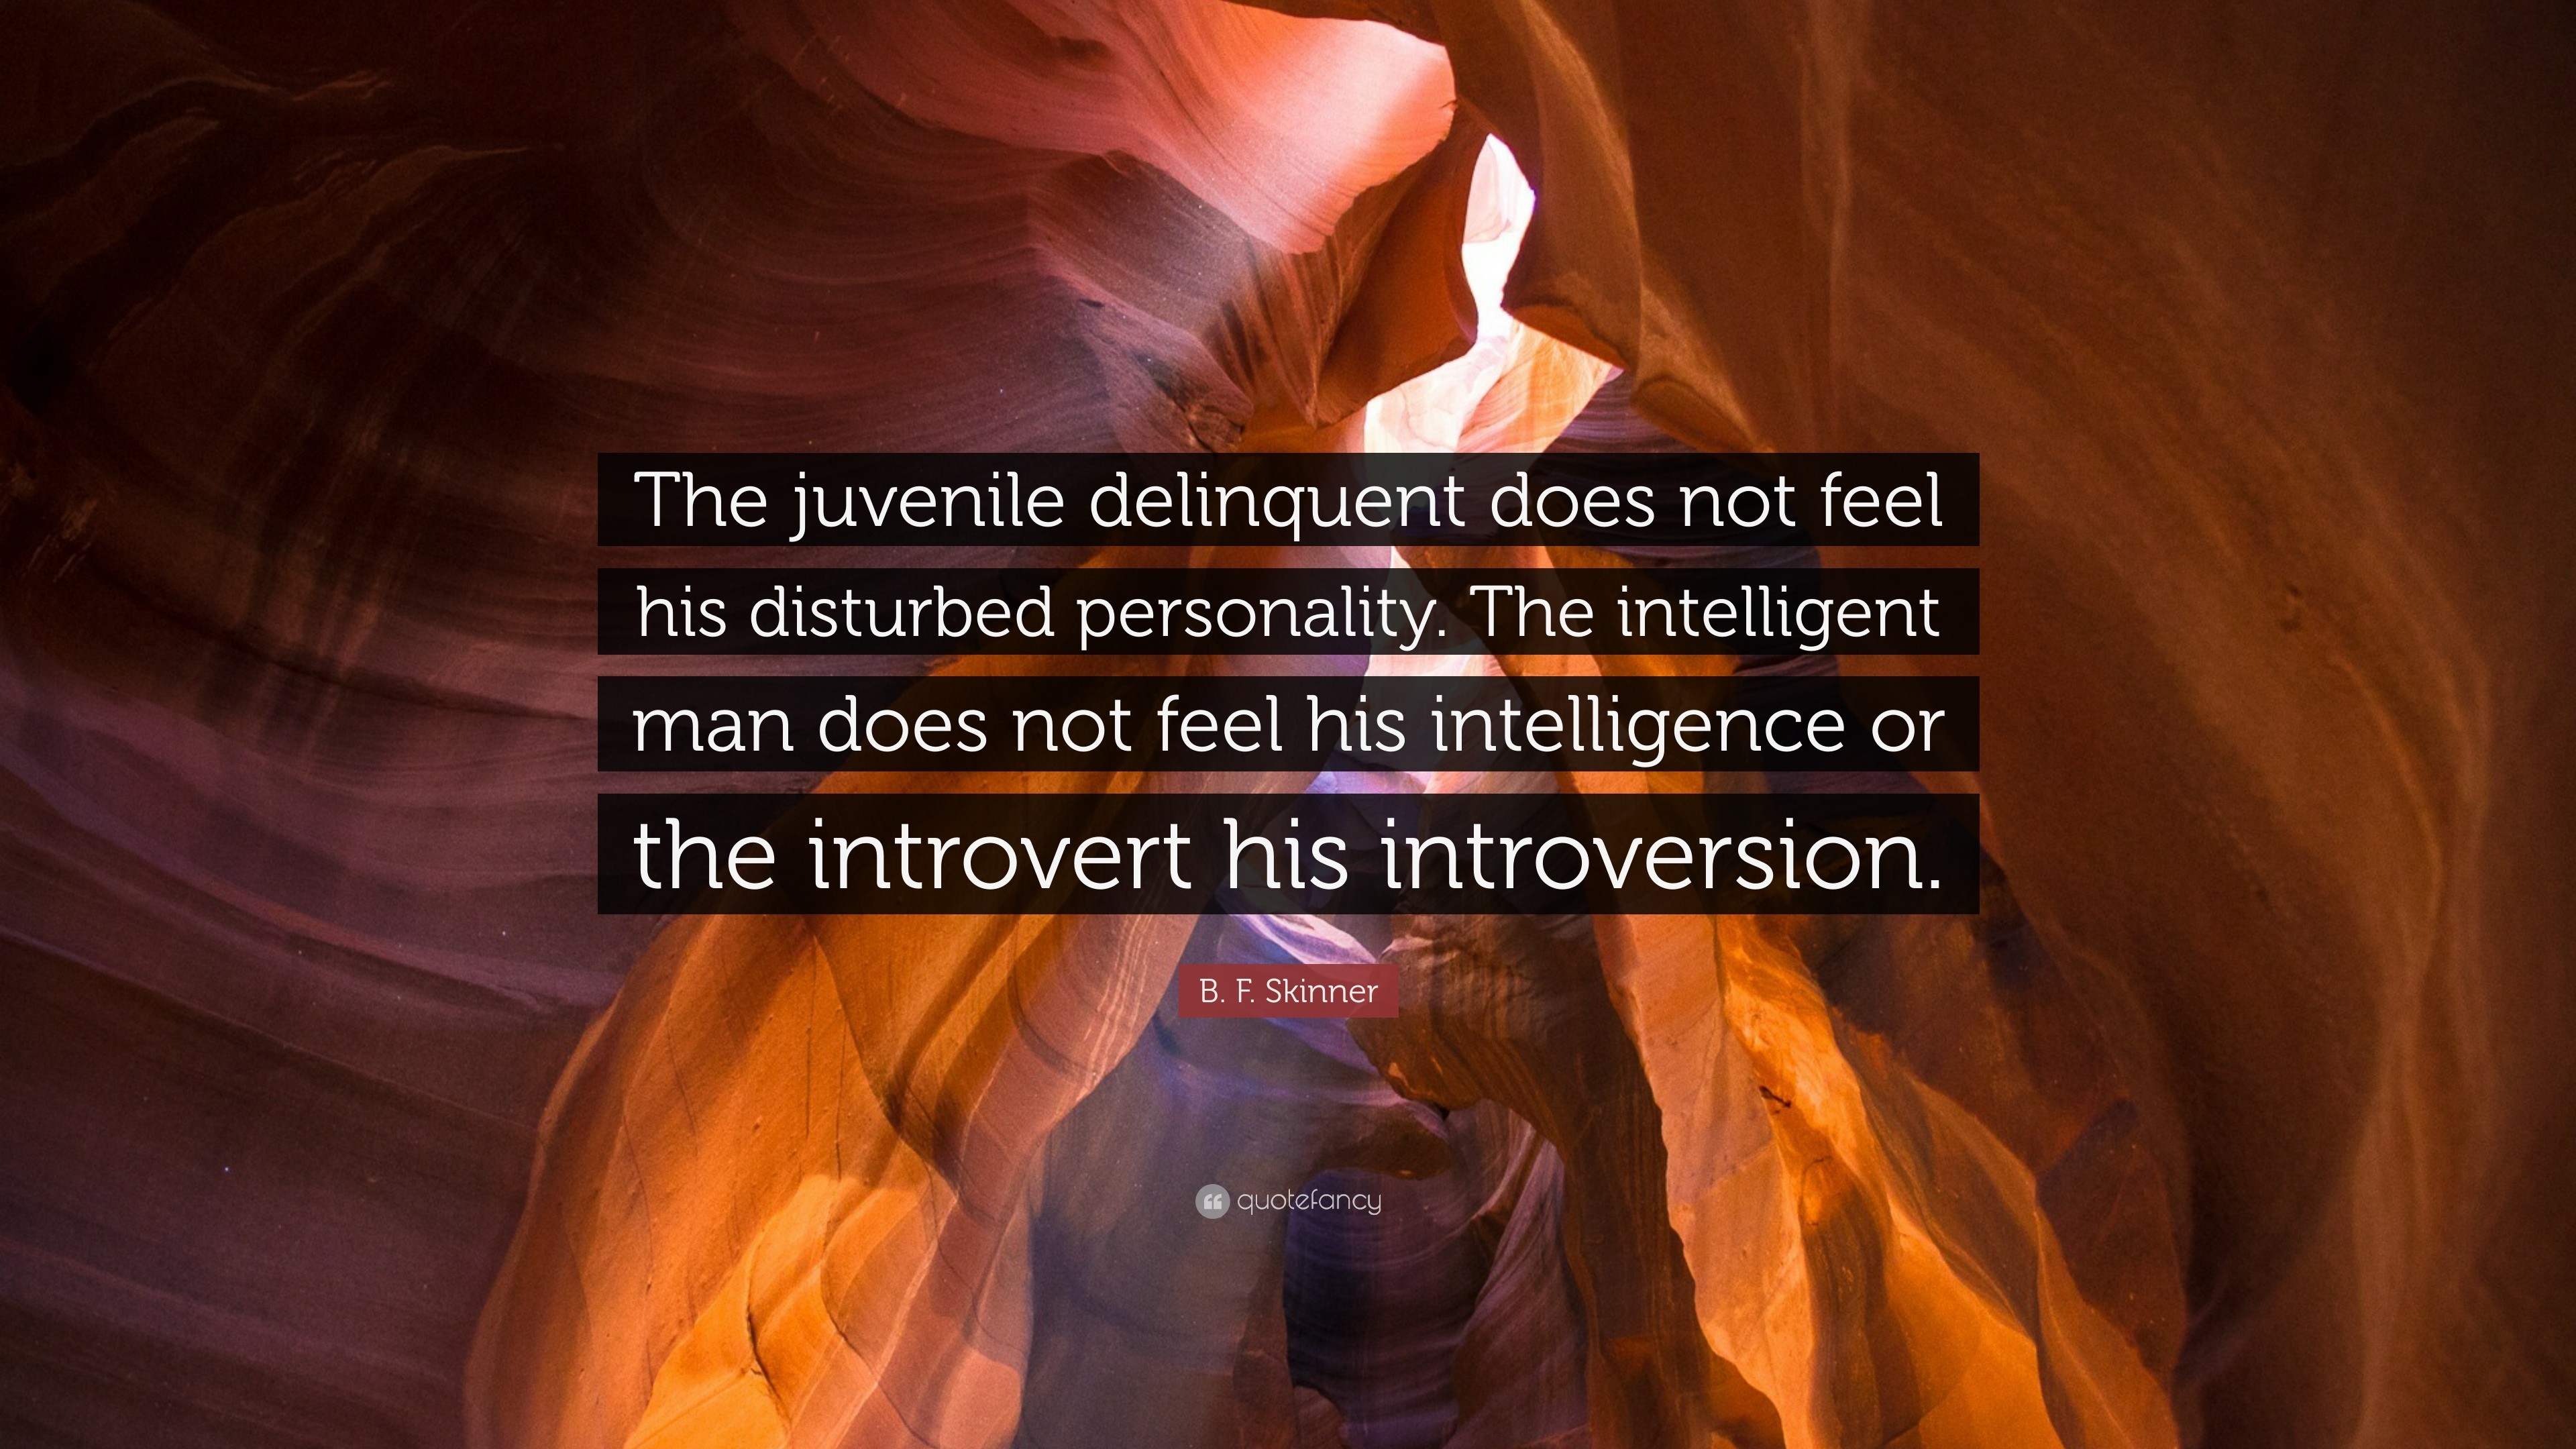 3840x2160 B. F. Skinner Quote: “The juvenile delinquent does not feel his disturbed  personality. The